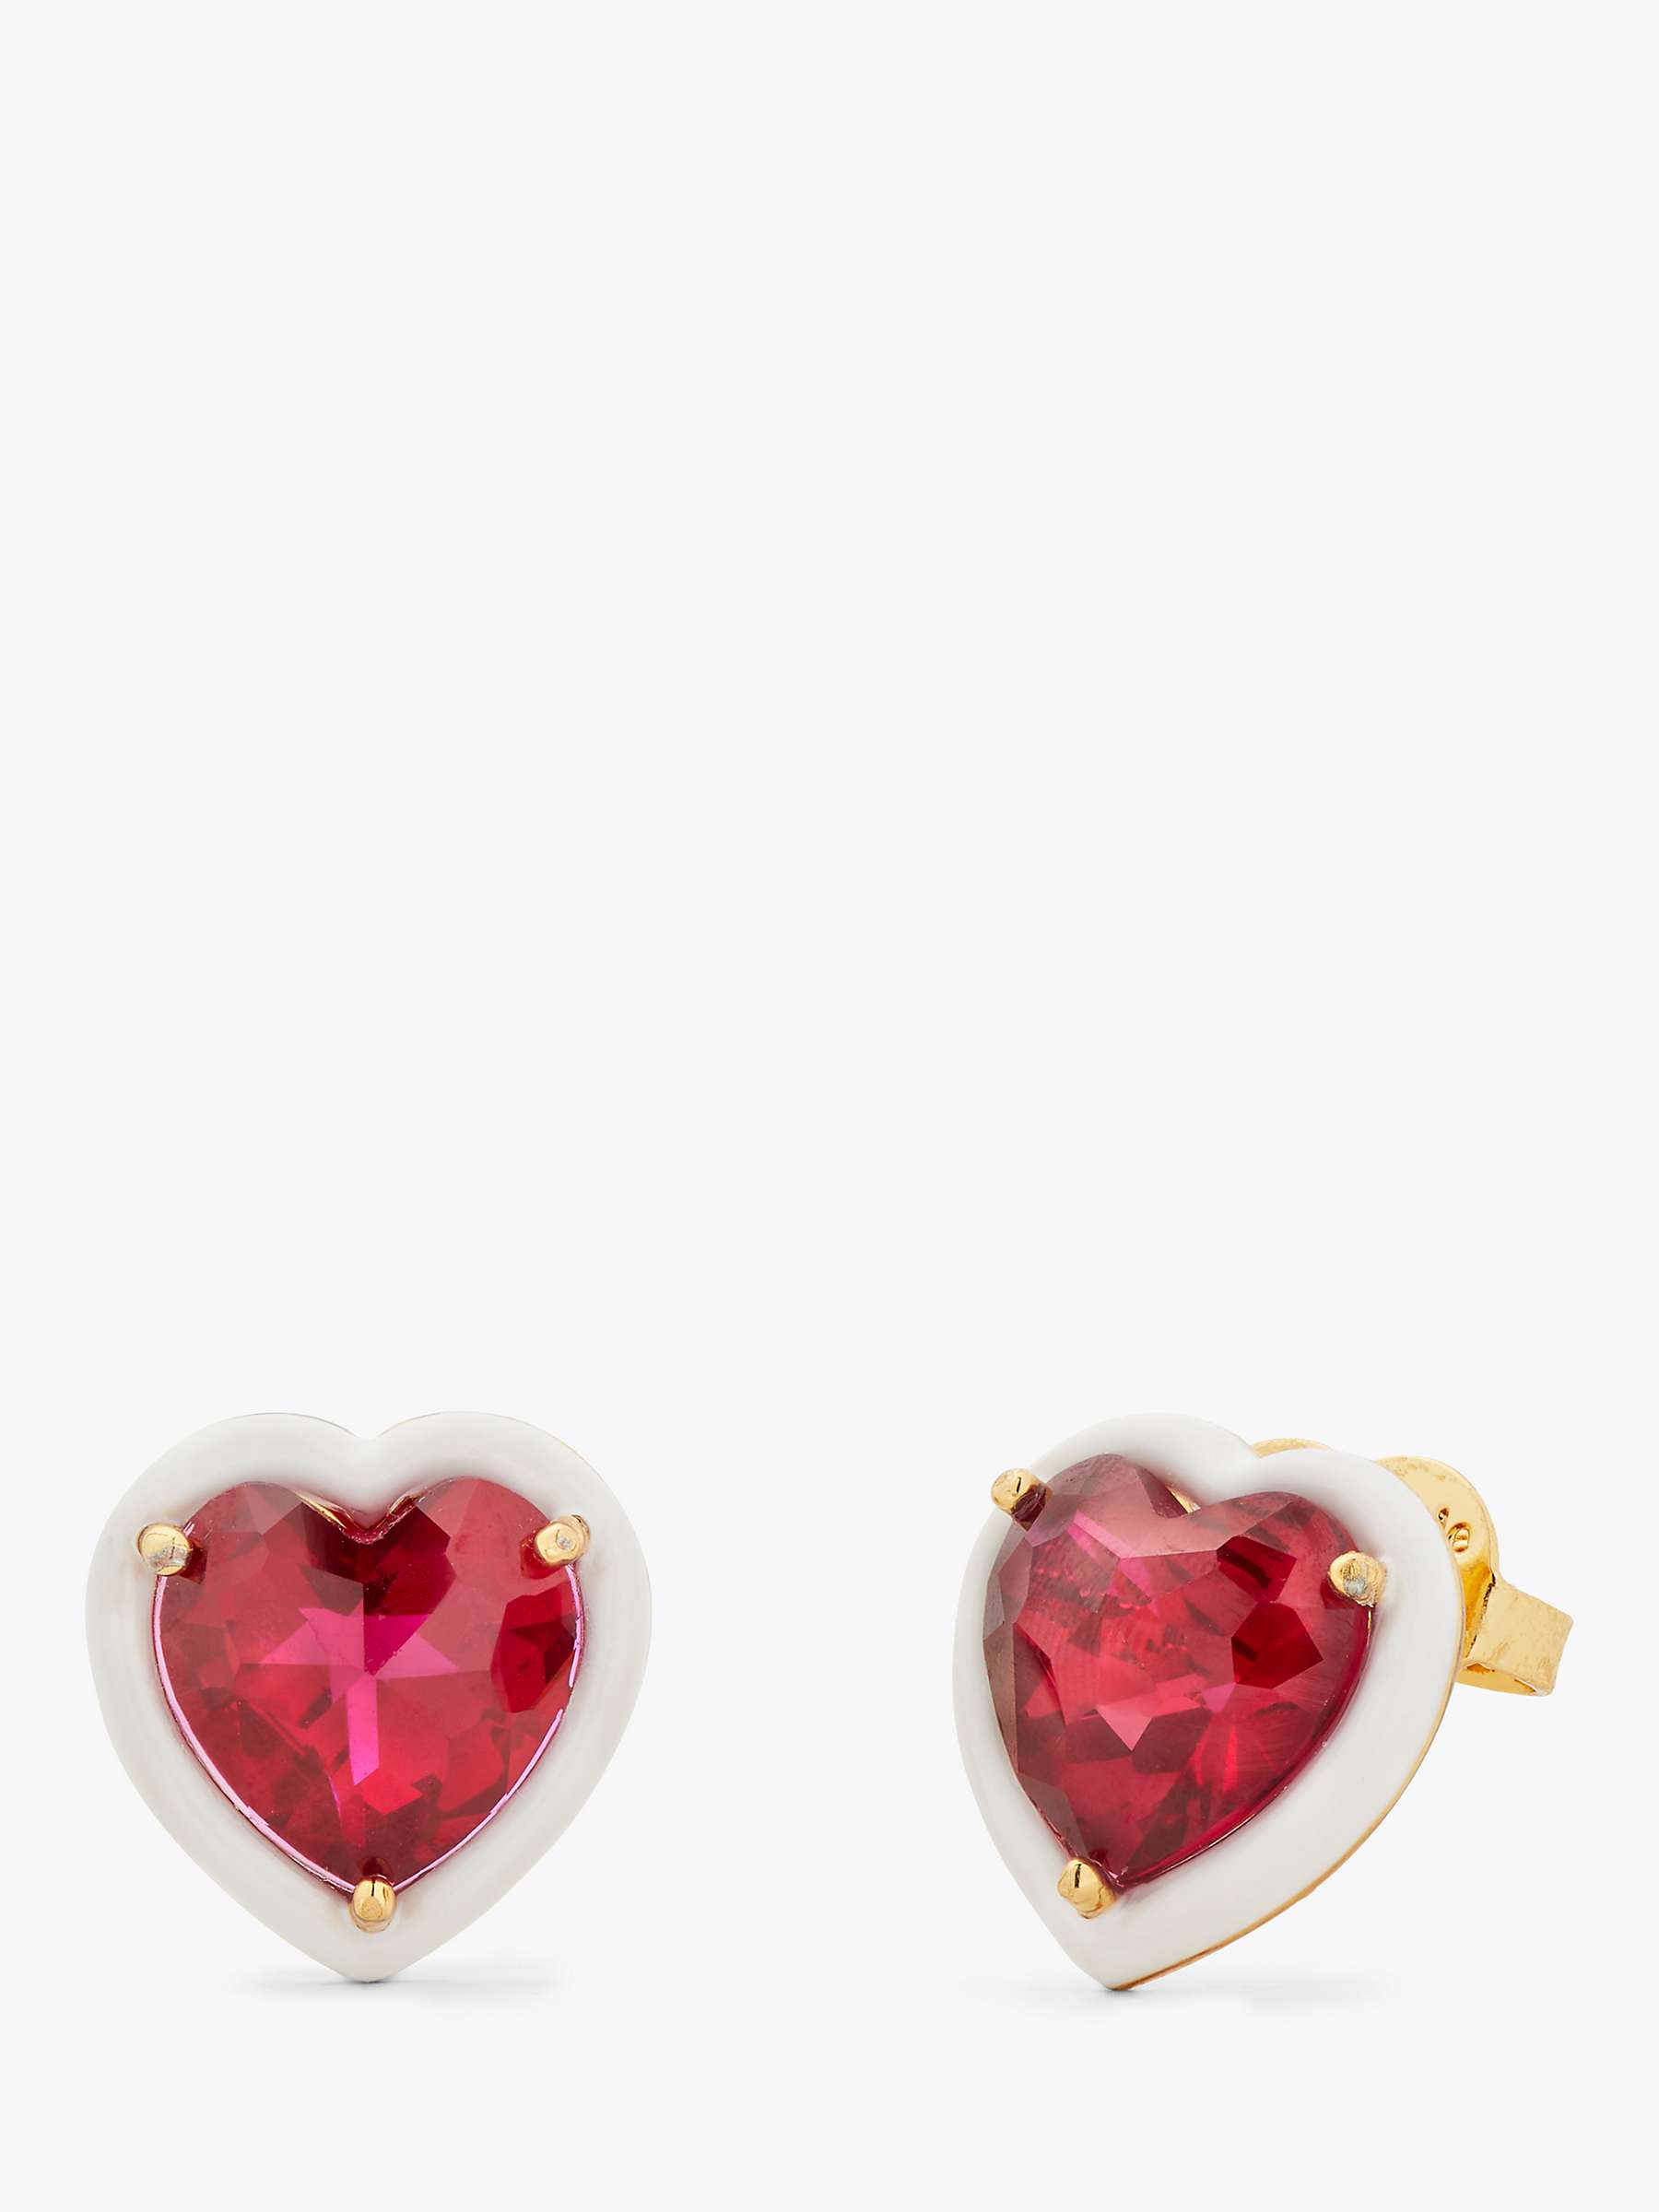 Buy kate spade new york Red Cubic Zirconia and Resin Heart Earrings, Gold Online at johnlewis.com